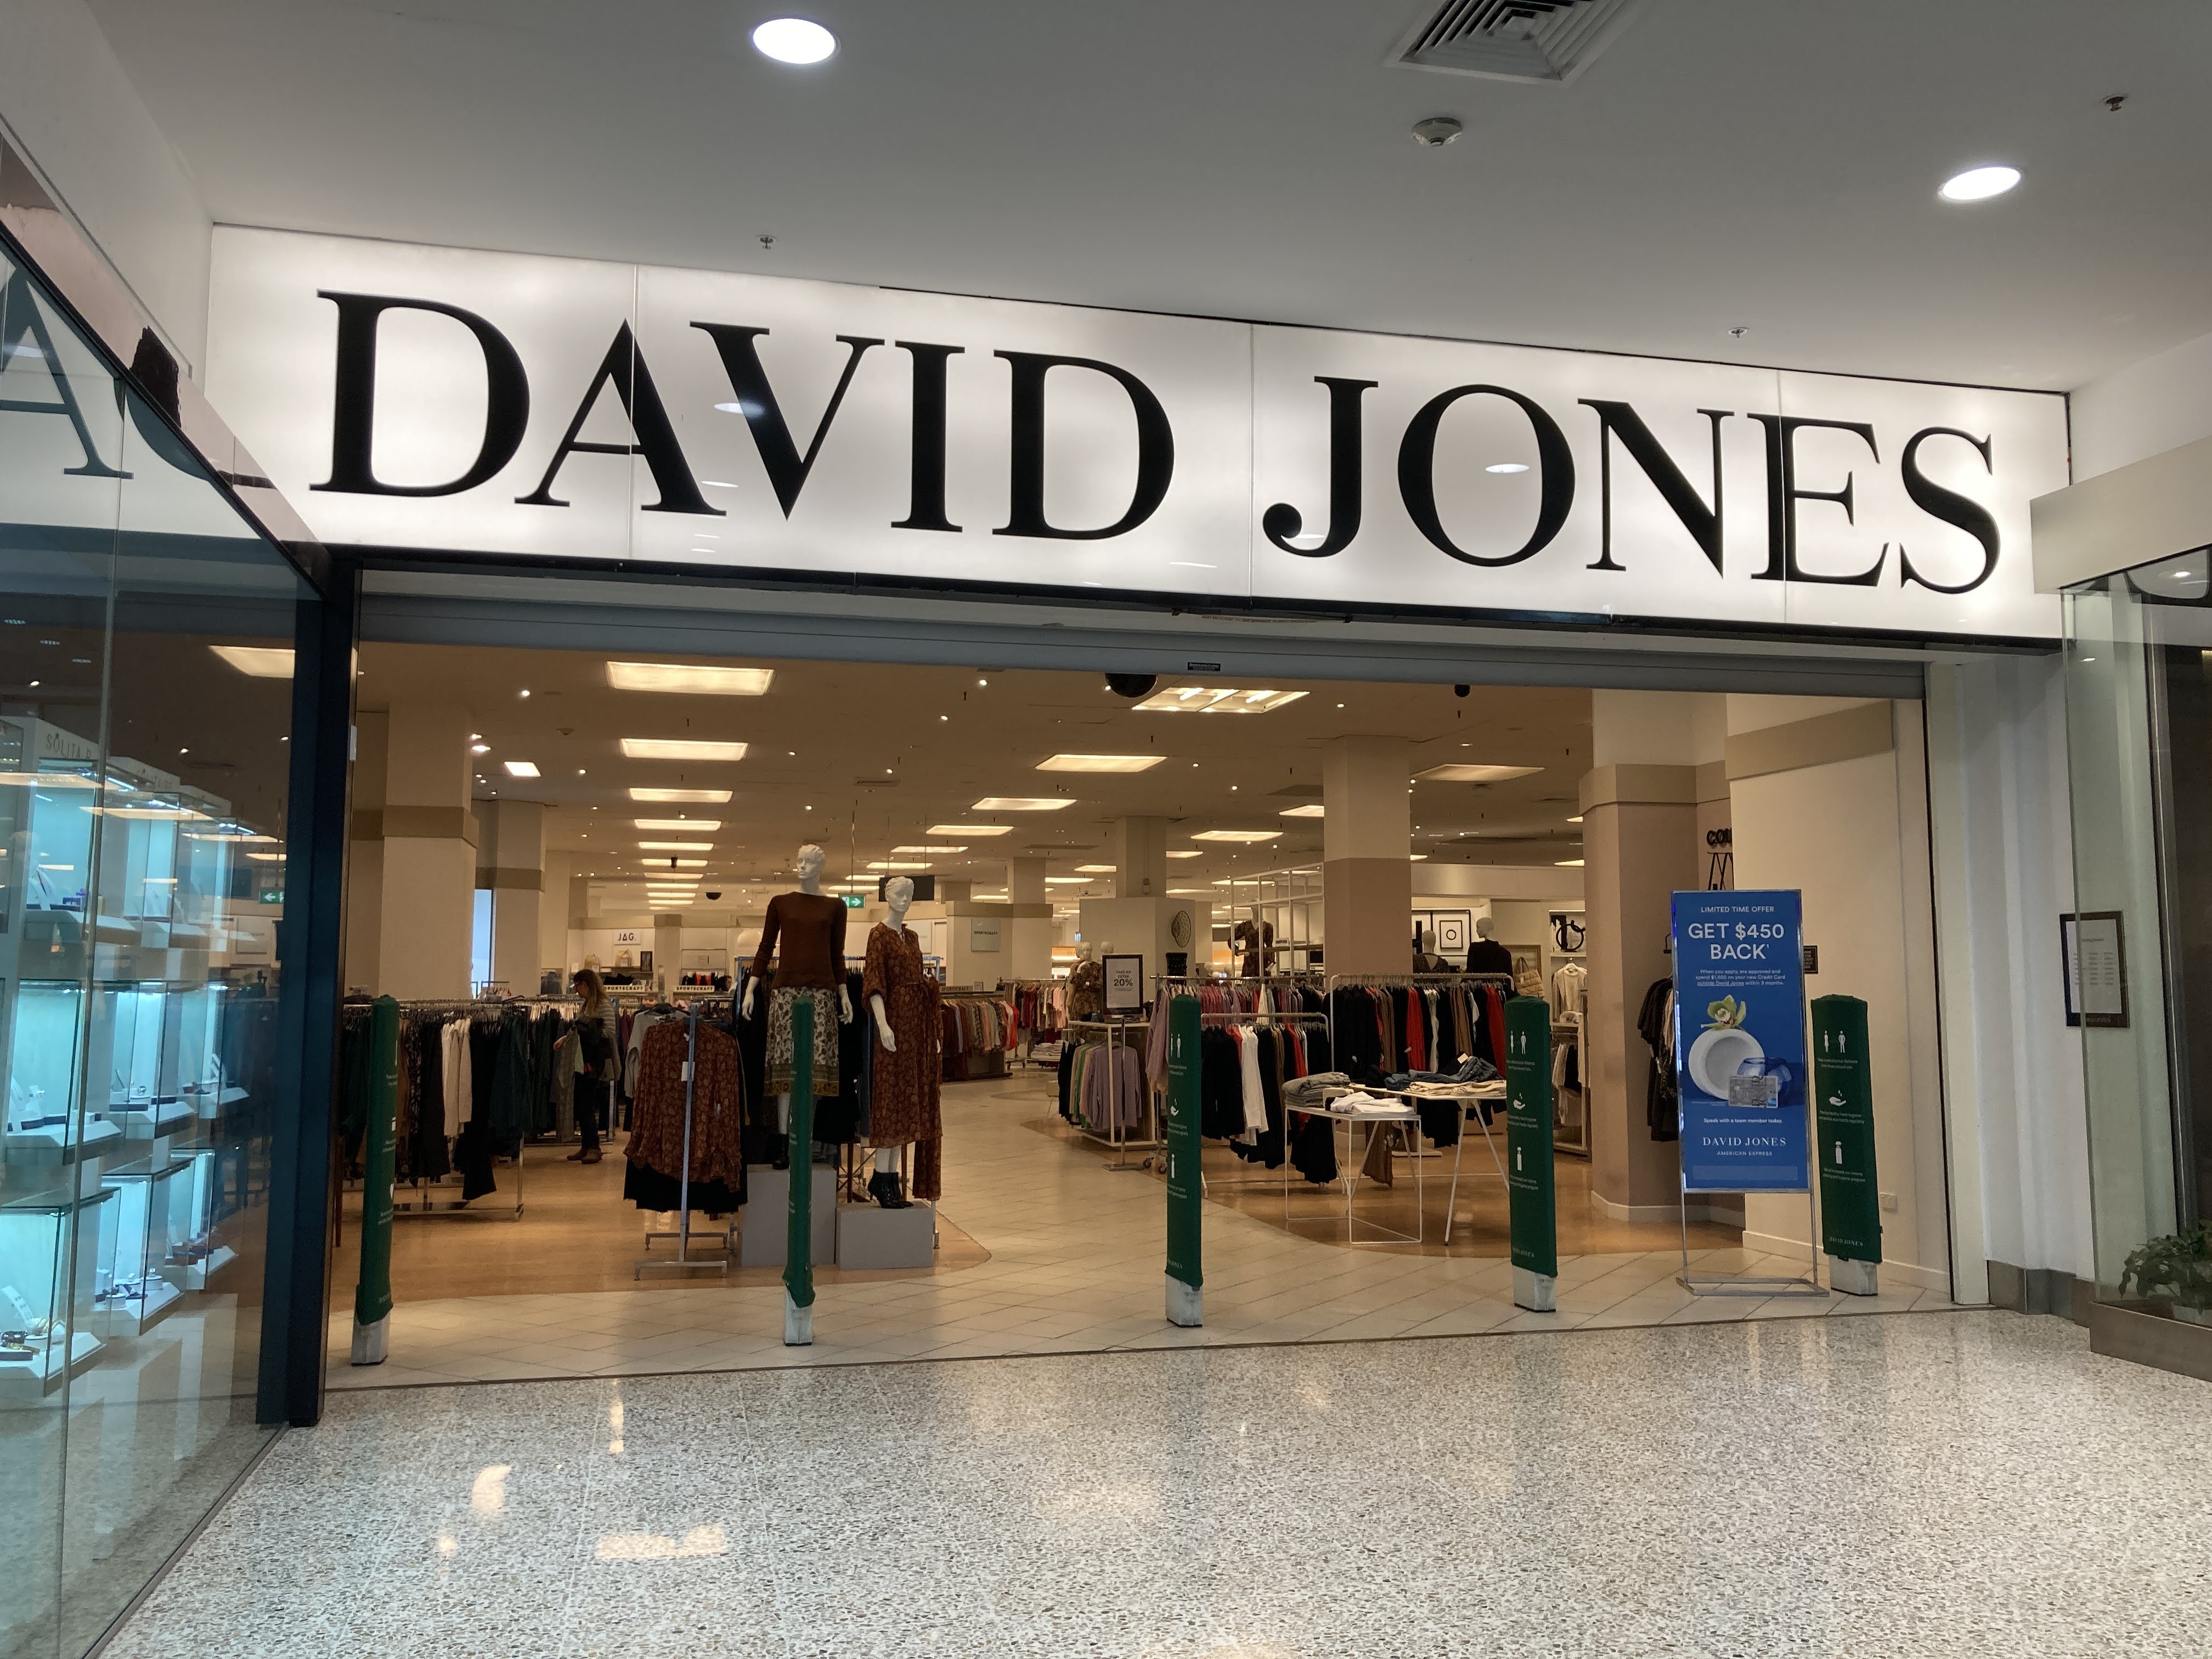 David Jones Pty Ltd, trading as David Jones (colloquially DJs), is an Australian luxury department store, the store was owned from 2014 to 2023 by the South African retail group Woolworths South Africa. In December 2022, David Jones was sold to private equity firm Anchorage Capital Partners for around $100m.
David Jones was founded in 1838 by David Jones, a Welsh merchant and future politician, after he emigrated to Australia, and is the oldest continuously operating department store in the world still trading under its original name.In 1980, the Adelaide Steamship Company acquired a substantial interest in David Jones, culminating in a complete takeover. The recession of the early 1990s caused the department store assets to be floated as "David Jones Limited". For the next two decades, the company went through turbulent times, eventually leading to discussions of a merger with Myer, and then, in 2014, a takeover by South African retail group Woolworths Holdings Limited. In 2016, Woolworths sold the iconic 1938 Market Street store and announced the relocation of DJ's head office to Richmond, Victoria.It has been a member of the International Association of Department Stores from 1979 to 2004.
David Jones Limited currently has 45 stores located in most Australian states and territories (except Tasmania and the Northern Territory). David Jones' main competitor is the larger, upmarket department store chain Myer. On 28 July 2016, David Jones opened its first New Zealand store in Wellington after buying Kirkcaldie & Stains, and on 21 November 2019, opened its first Auckland store in the newly developed Westfield Newmarket.